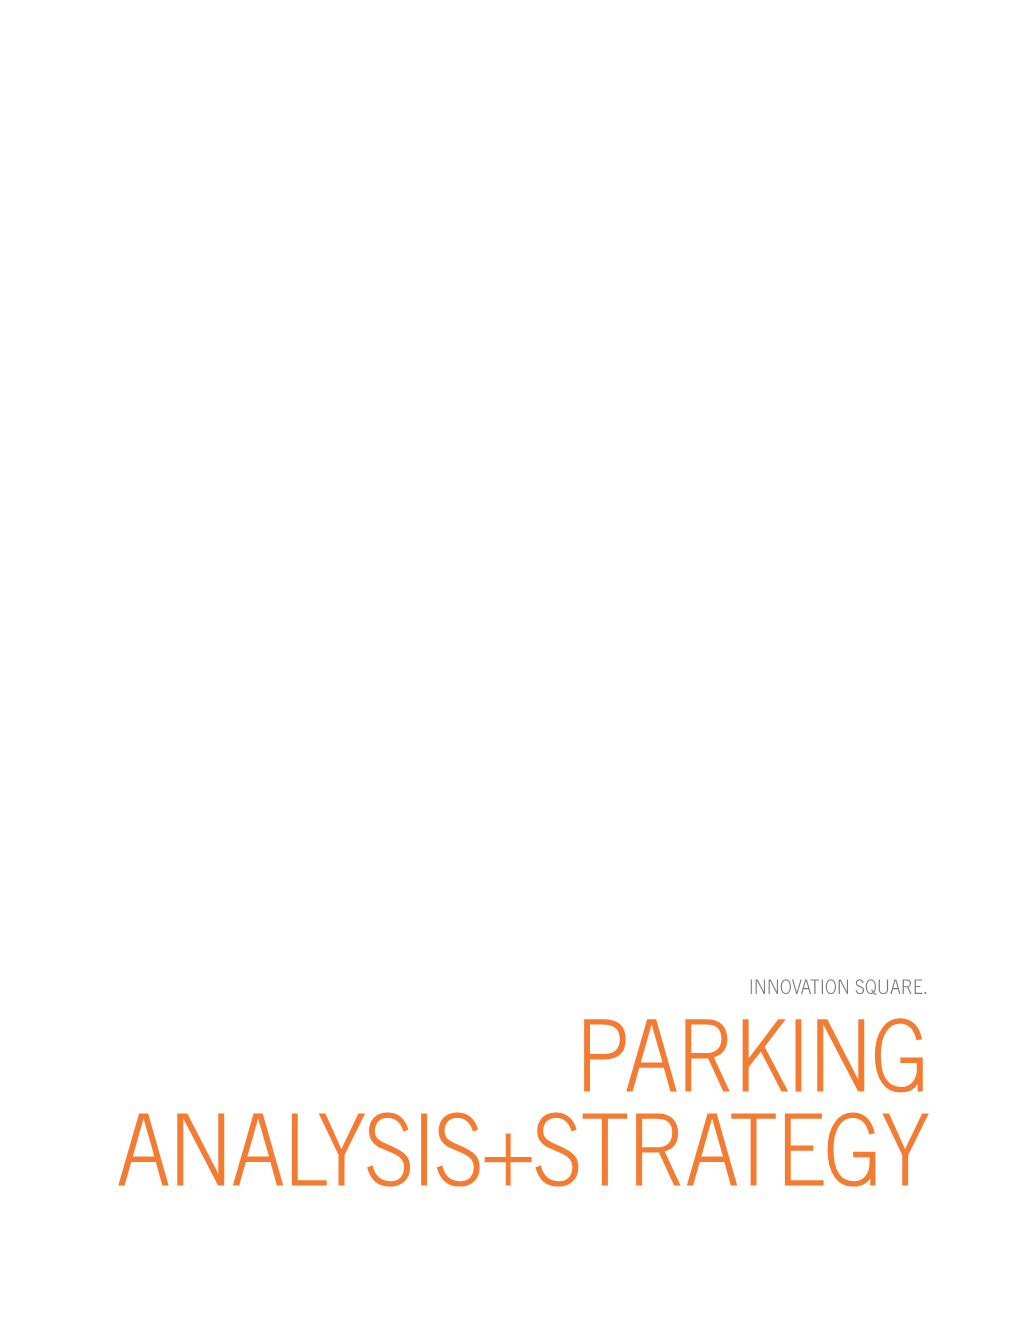 Analysis+Strategy Parking